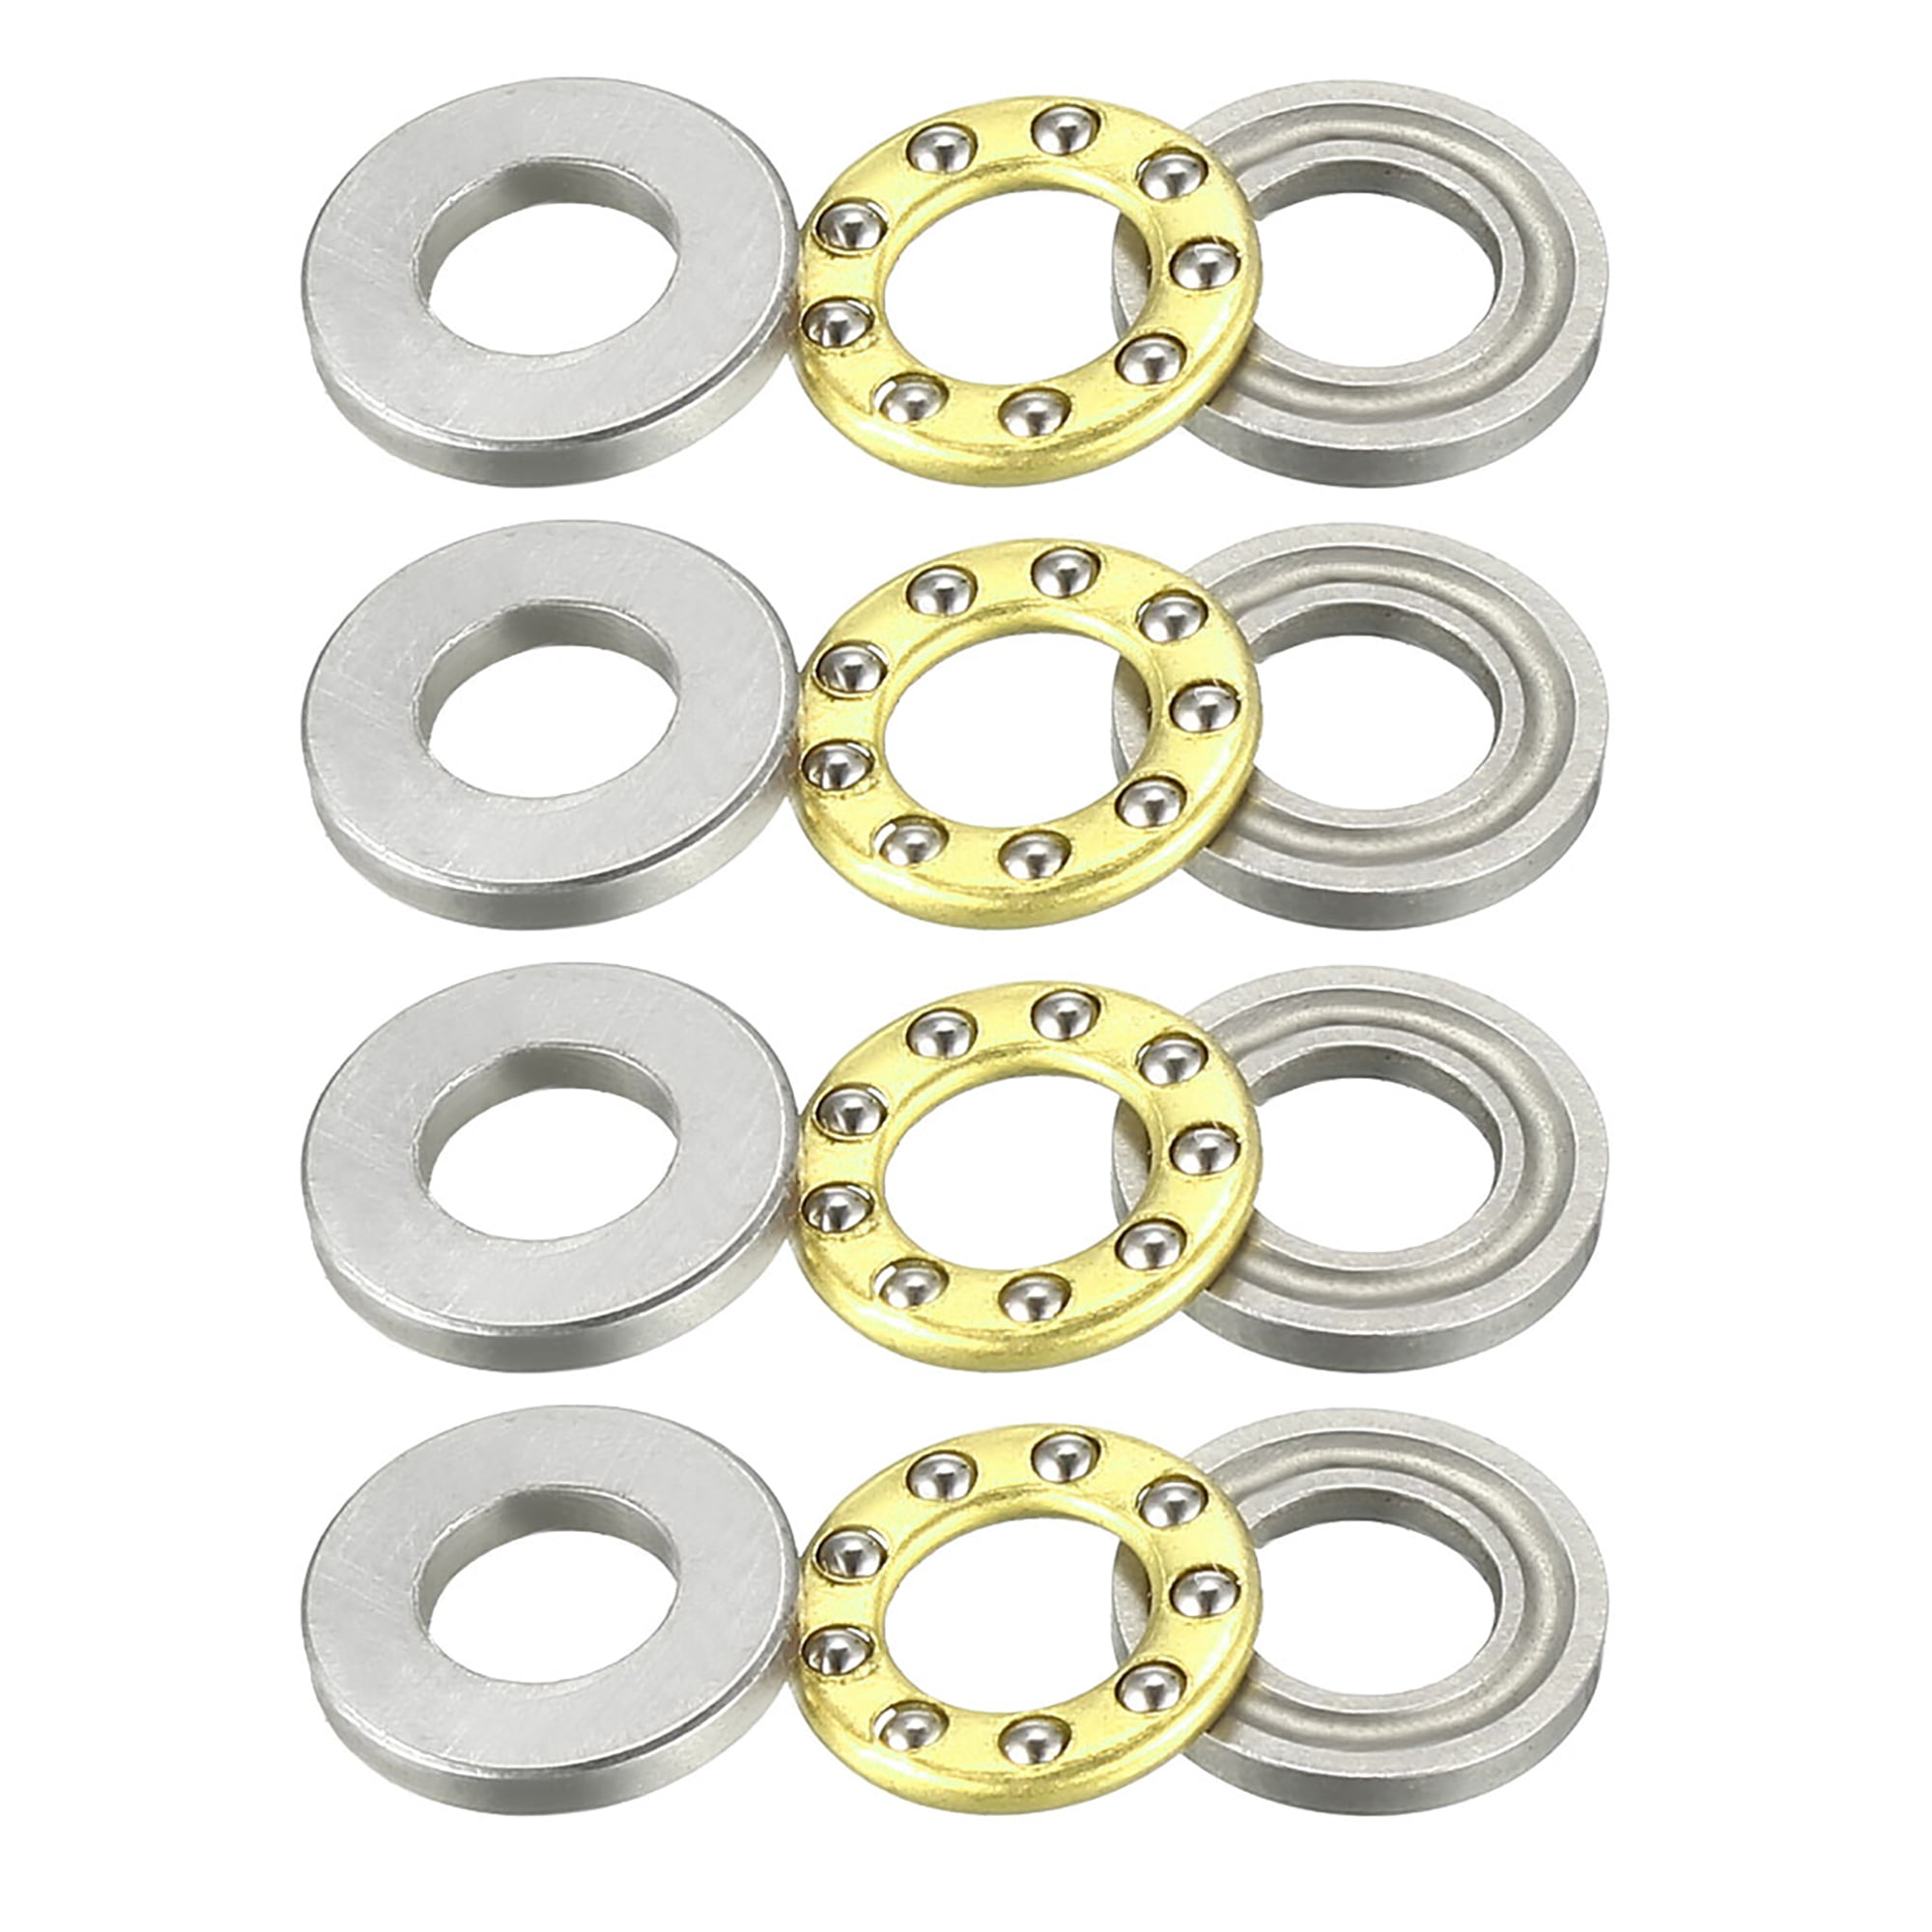 Miniature Thrust Ball Bearings F5-10M 5x10x4mm Chrome Steel with washers 1 Pieces 